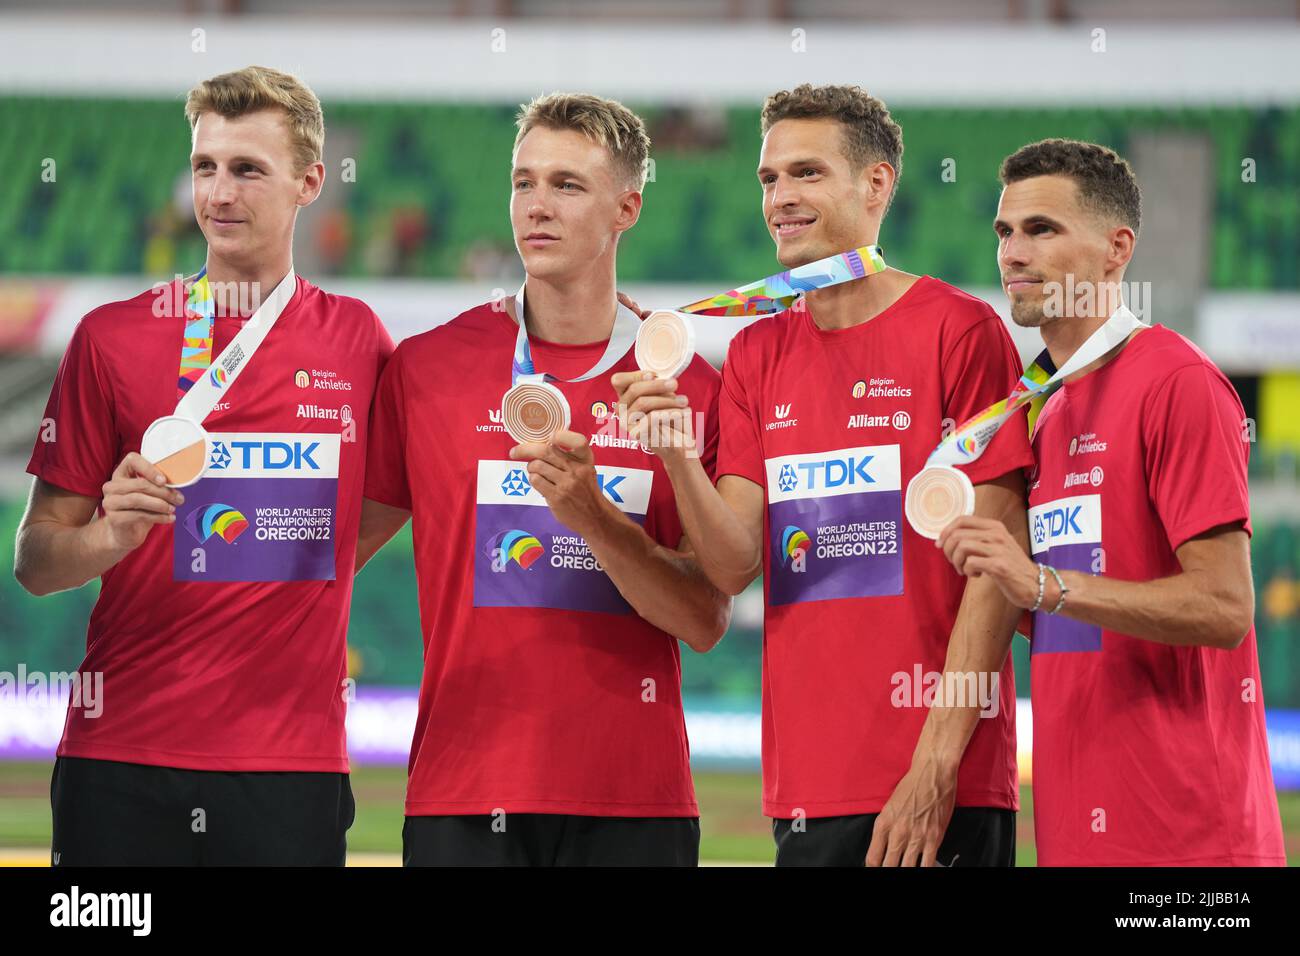 Eugene, USA. 24th July, 2022. Bronze medalists Alexander Doom, Julien Waterin, Dylan Borlee and Kevin Borlee (L to R) of Belgium pose during the men's 4x400m relay awarding ceremony at the World Athletics Championships Oregon22 in Eugene, Oregon, the United States, July 24, 2022. Credit: Wu Xiaoling/Xinhua/Alamy Live News Stock Photo